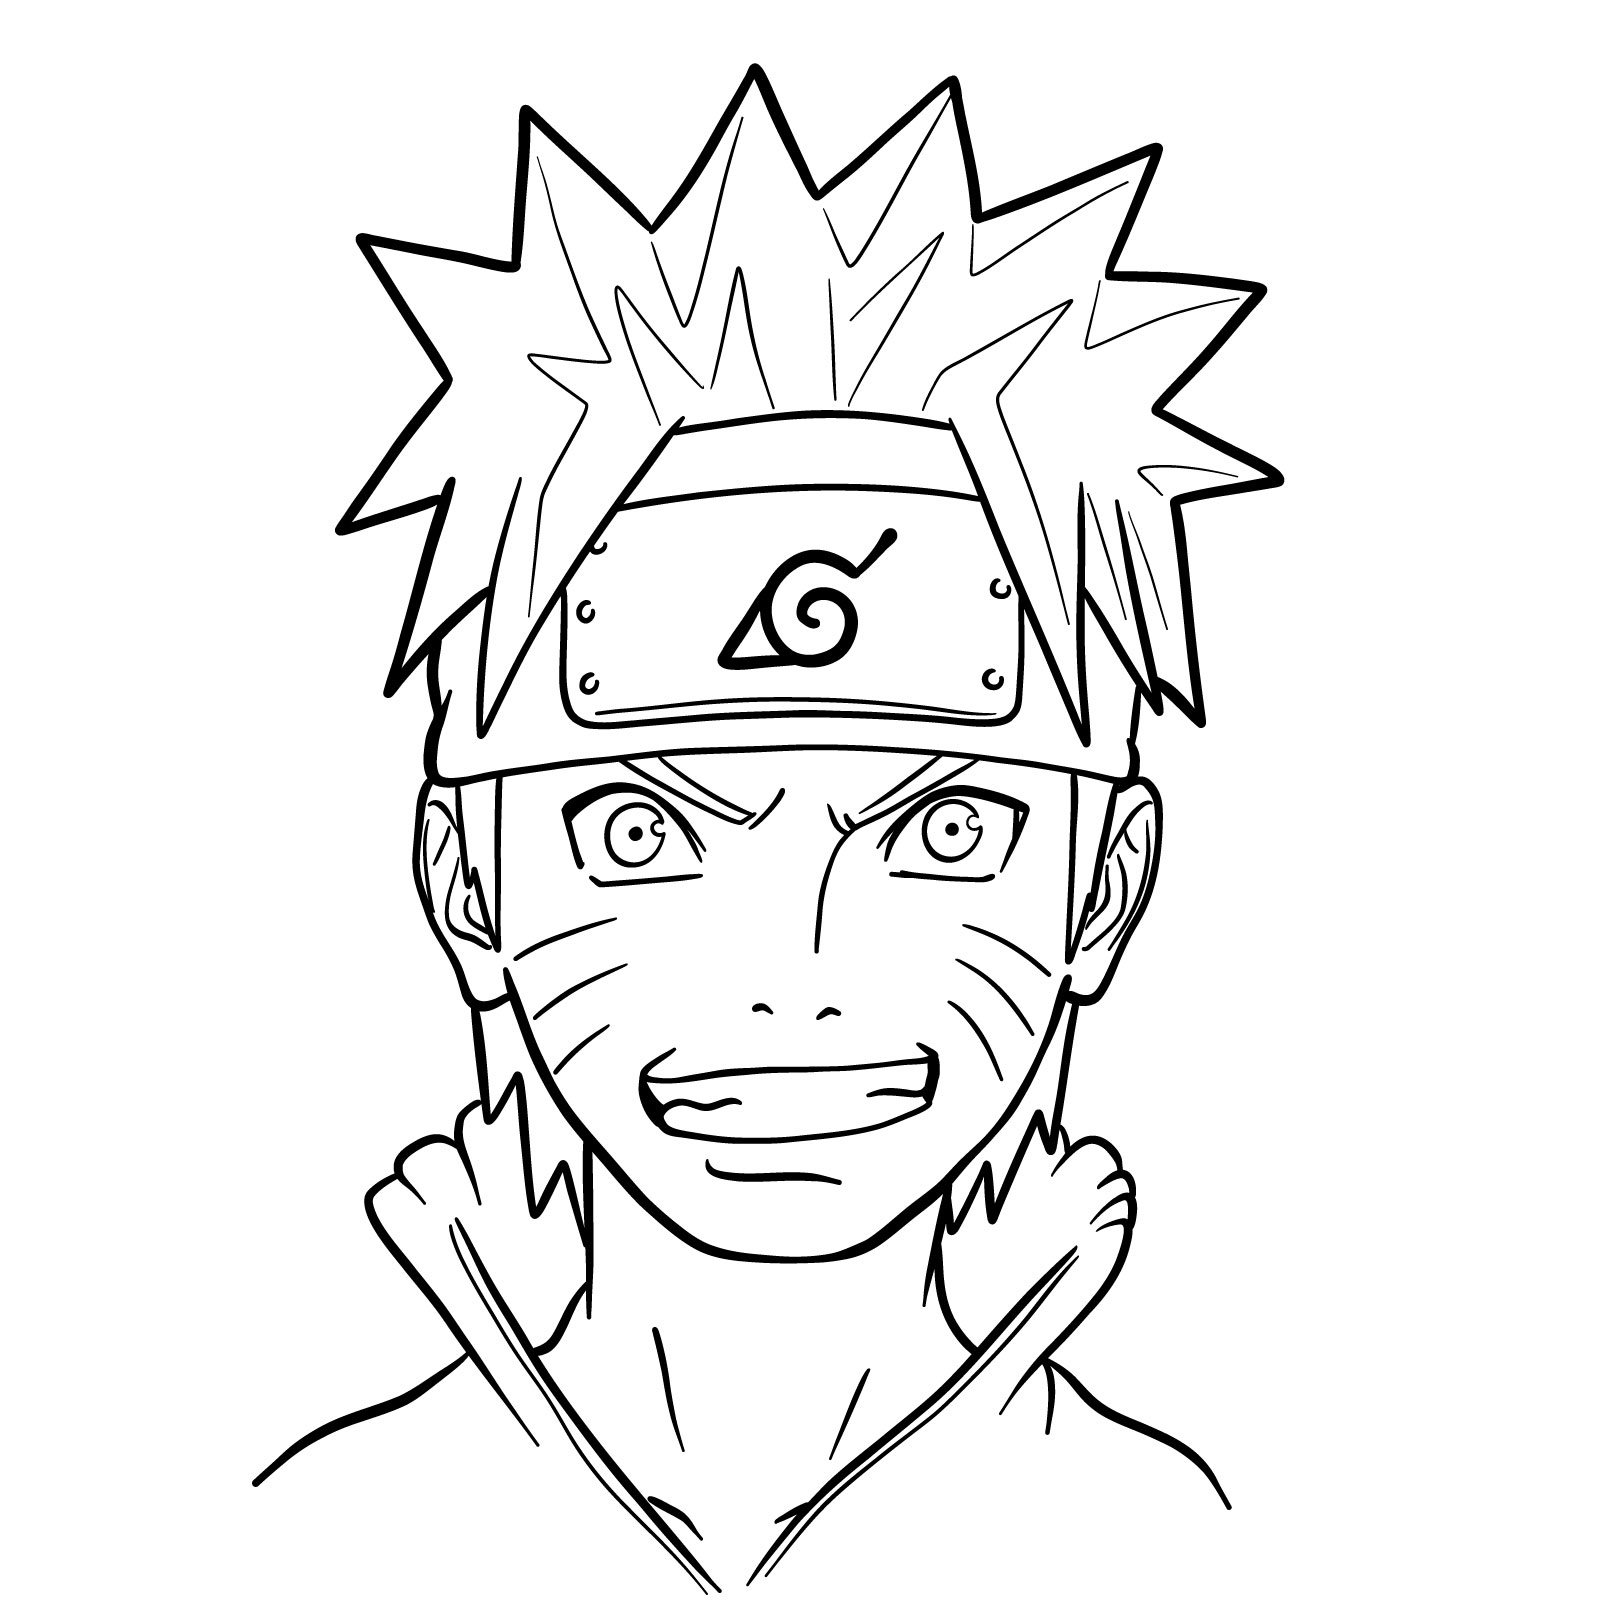 How to Draw Naruto's Face from Team 7 Manga - final step